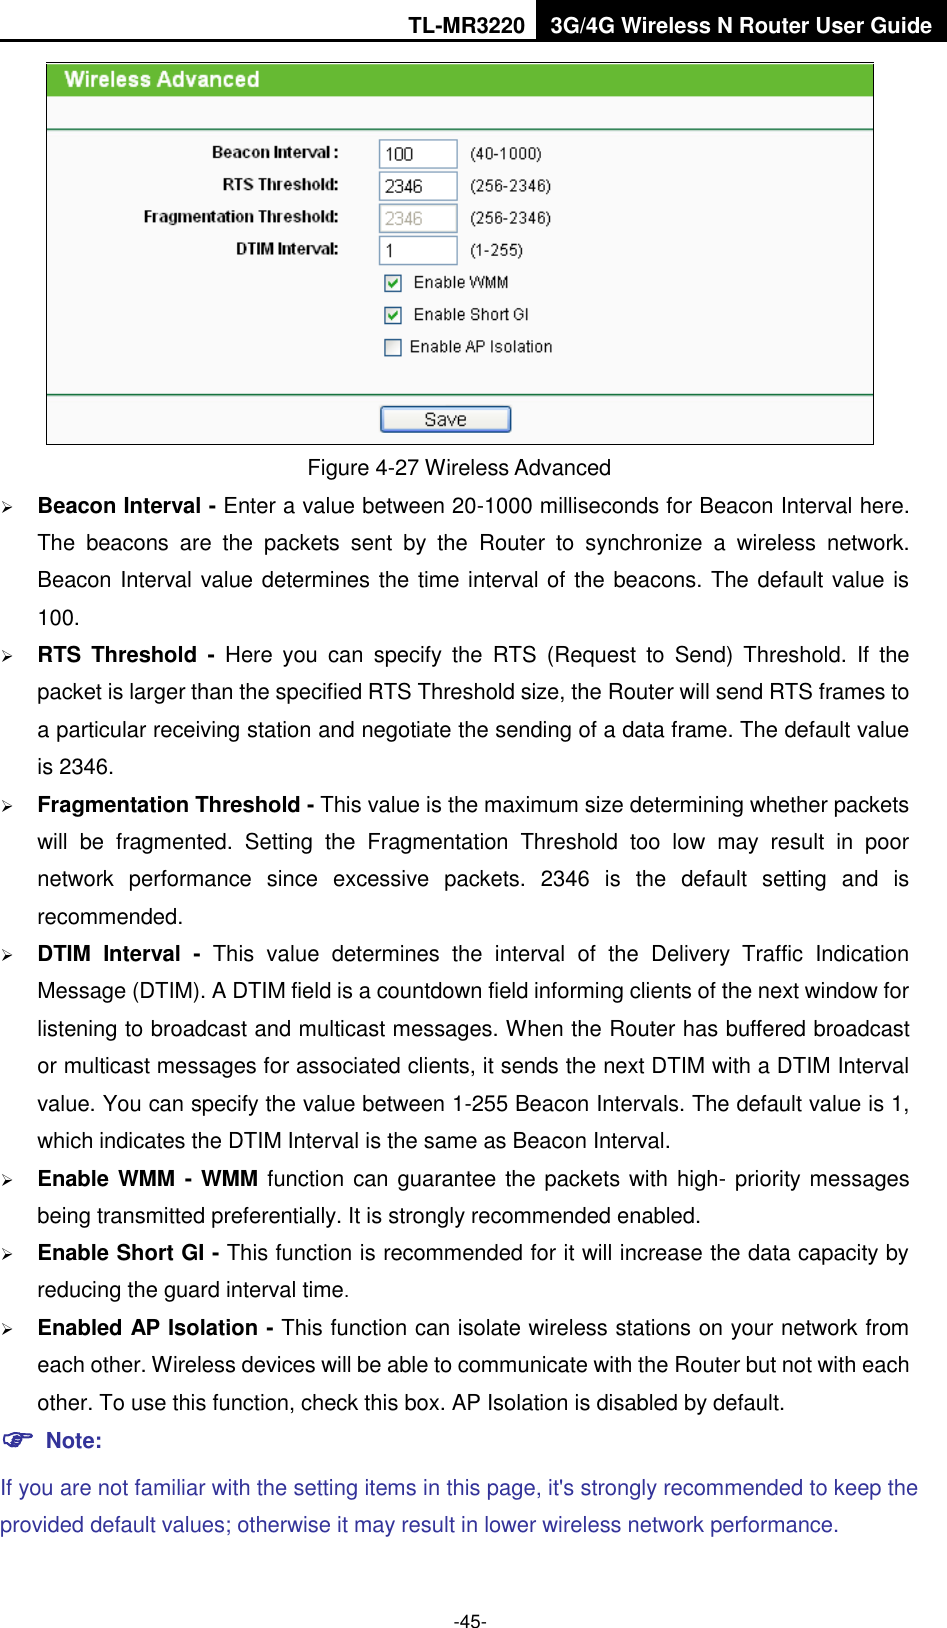 TL-MR3220 3G/4G Wireless N Router User Guide  -45-  Figure 4-27 Wireless Advanced  Beacon Interval - Enter a value between 20-1000 milliseconds for Beacon Interval here. The  beacons  are  the  packets  sent  by  the  Router  to  synchronize  a  wireless  network. Beacon Interval value determines the time interval of the beacons. The default value is 100.    RTS  Threshold  -  Here  you  can  specify  the  RTS  (Request  to  Send)  Threshold.  If  the packet is larger than the specified RTS Threshold size, the Router will send RTS frames to a particular receiving station and negotiate the sending of a data frame. The default value is 2346.    Fragmentation Threshold - This value is the maximum size determining whether packets will  be  fragmented.  Setting  the  Fragmentation  Threshold  too  low  may  result  in  poor network  performance  since  excessive  packets.  2346  is  the  default  setting  and  is recommended.    DTIM  Interval  -  This  value  determines  the  interval  of  the  Delivery  Traffic  Indication Message (DTIM). A DTIM field is a countdown field informing clients of the next window for listening to broadcast and multicast messages. When the Router has buffered broadcast or multicast messages for associated clients, it sends the next DTIM with a DTIM Interval value. You can specify the value between 1-255 Beacon Intervals. The default value is 1, which indicates the DTIM Interval is the same as Beacon Interval.    Enable WMM - WMM function can guarantee the packets with high- priority messages being transmitted preferentially. It is strongly recommended enabled.    Enable Short GI - This function is recommended for it will increase the data capacity by reducing the guard interval time.    Enabled AP Isolation - This function can isolate wireless stations on your network from each other. Wireless devices will be able to communicate with the Router but not with each other. To use this function, check this box. AP Isolation is disabled by default.  Note: If you are not familiar with the setting items in this page, it&apos;s strongly recommended to keep the provided default values; otherwise it may result in lower wireless network performance. 